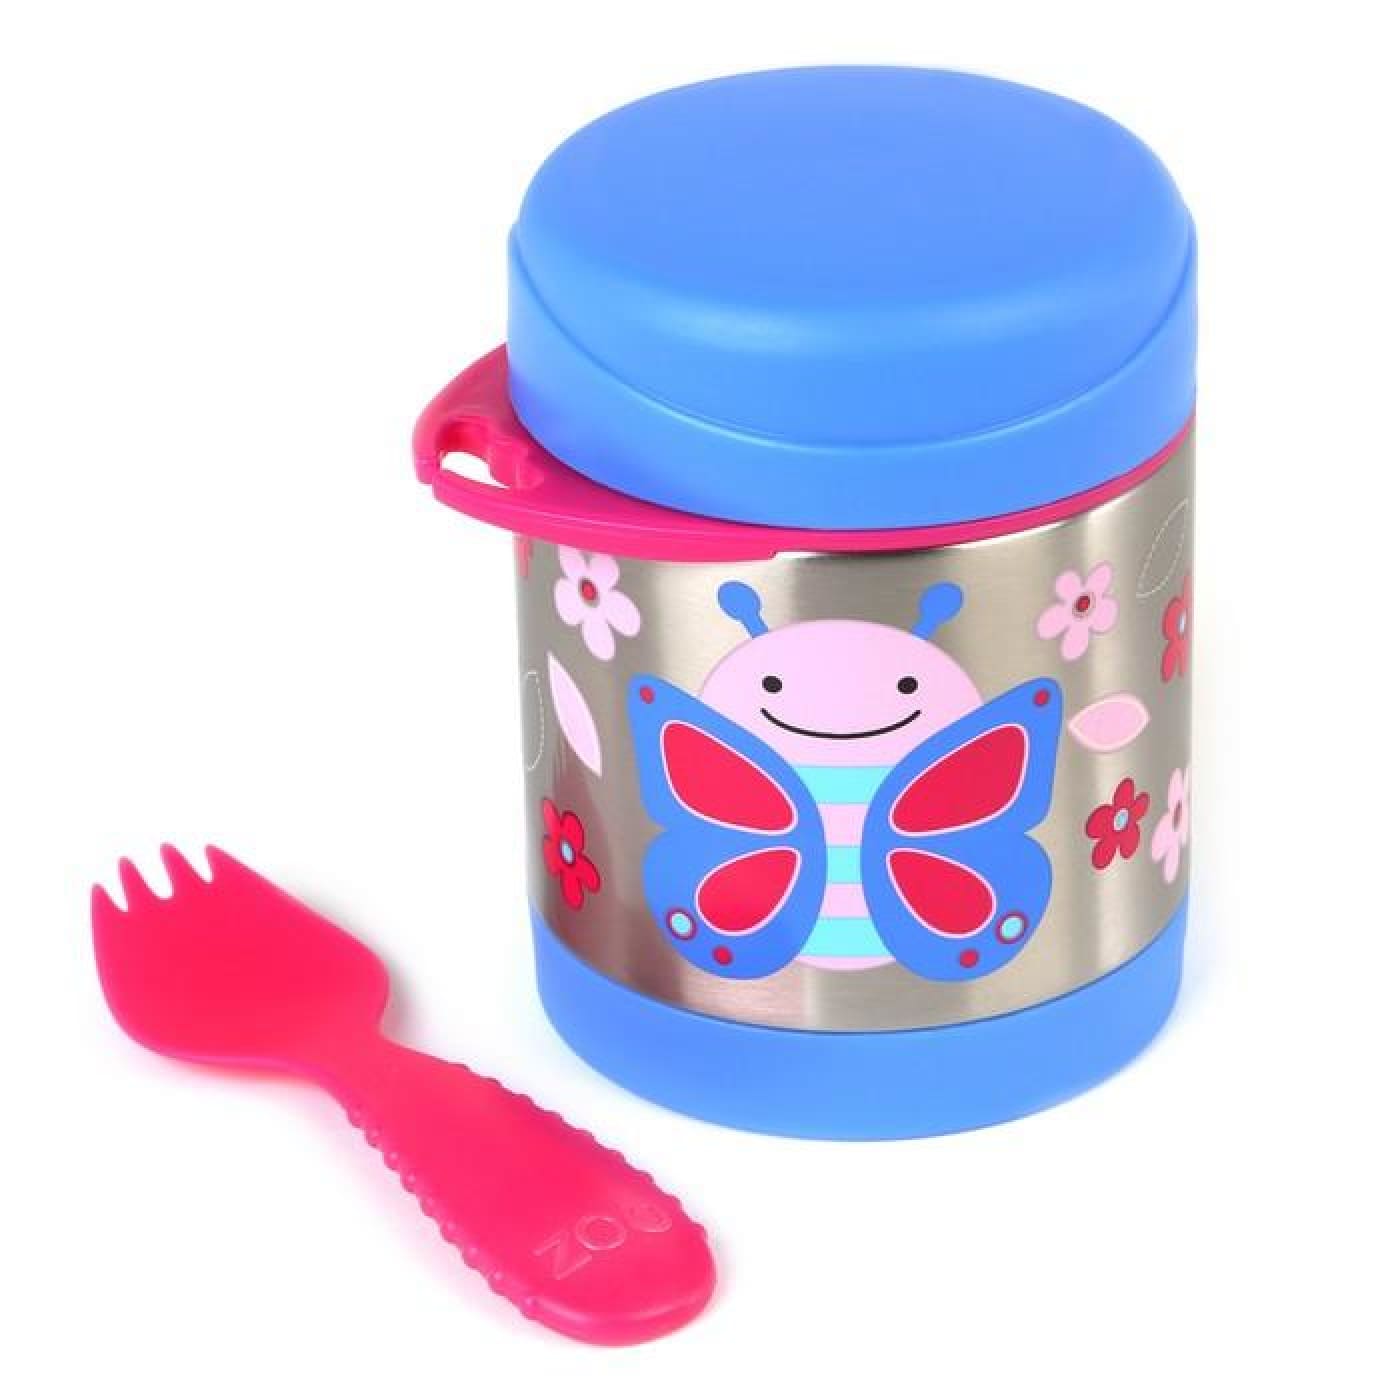 Skip Hop Zoo Insulated Food Jar - Butterfly - NURSING & FEEDING - CONTAINERS/FEEDERS